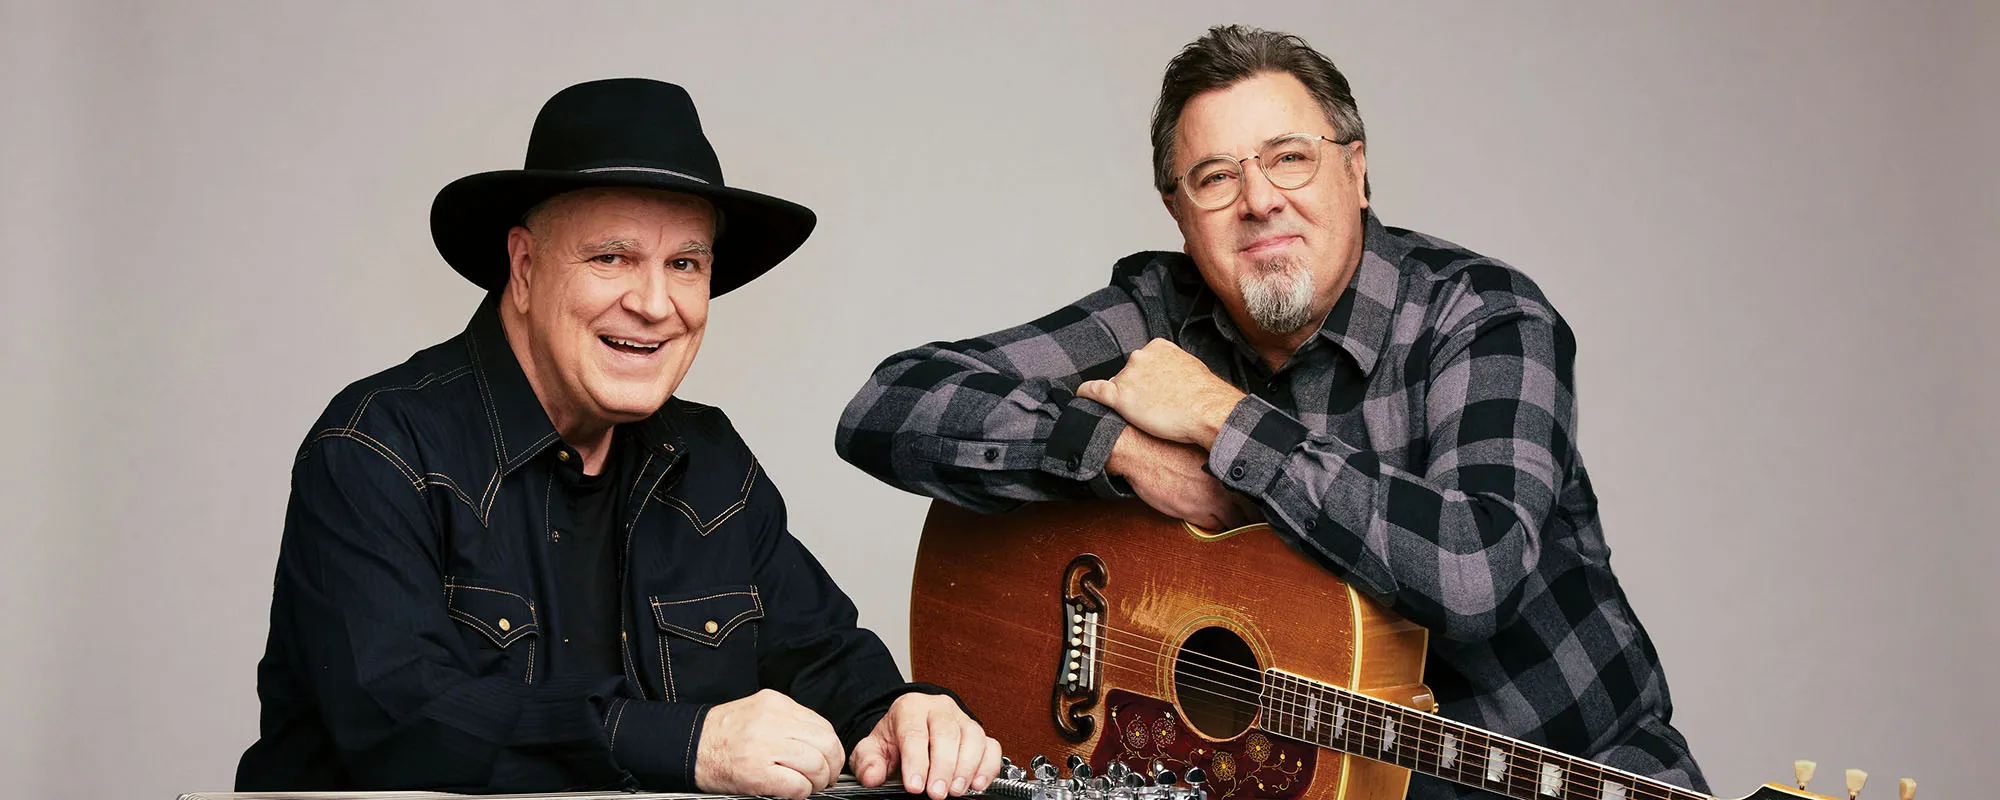 Vince Gill and Paul Franklin Open up About Recording “Danny Boy”: “There’s an Element of Risk”